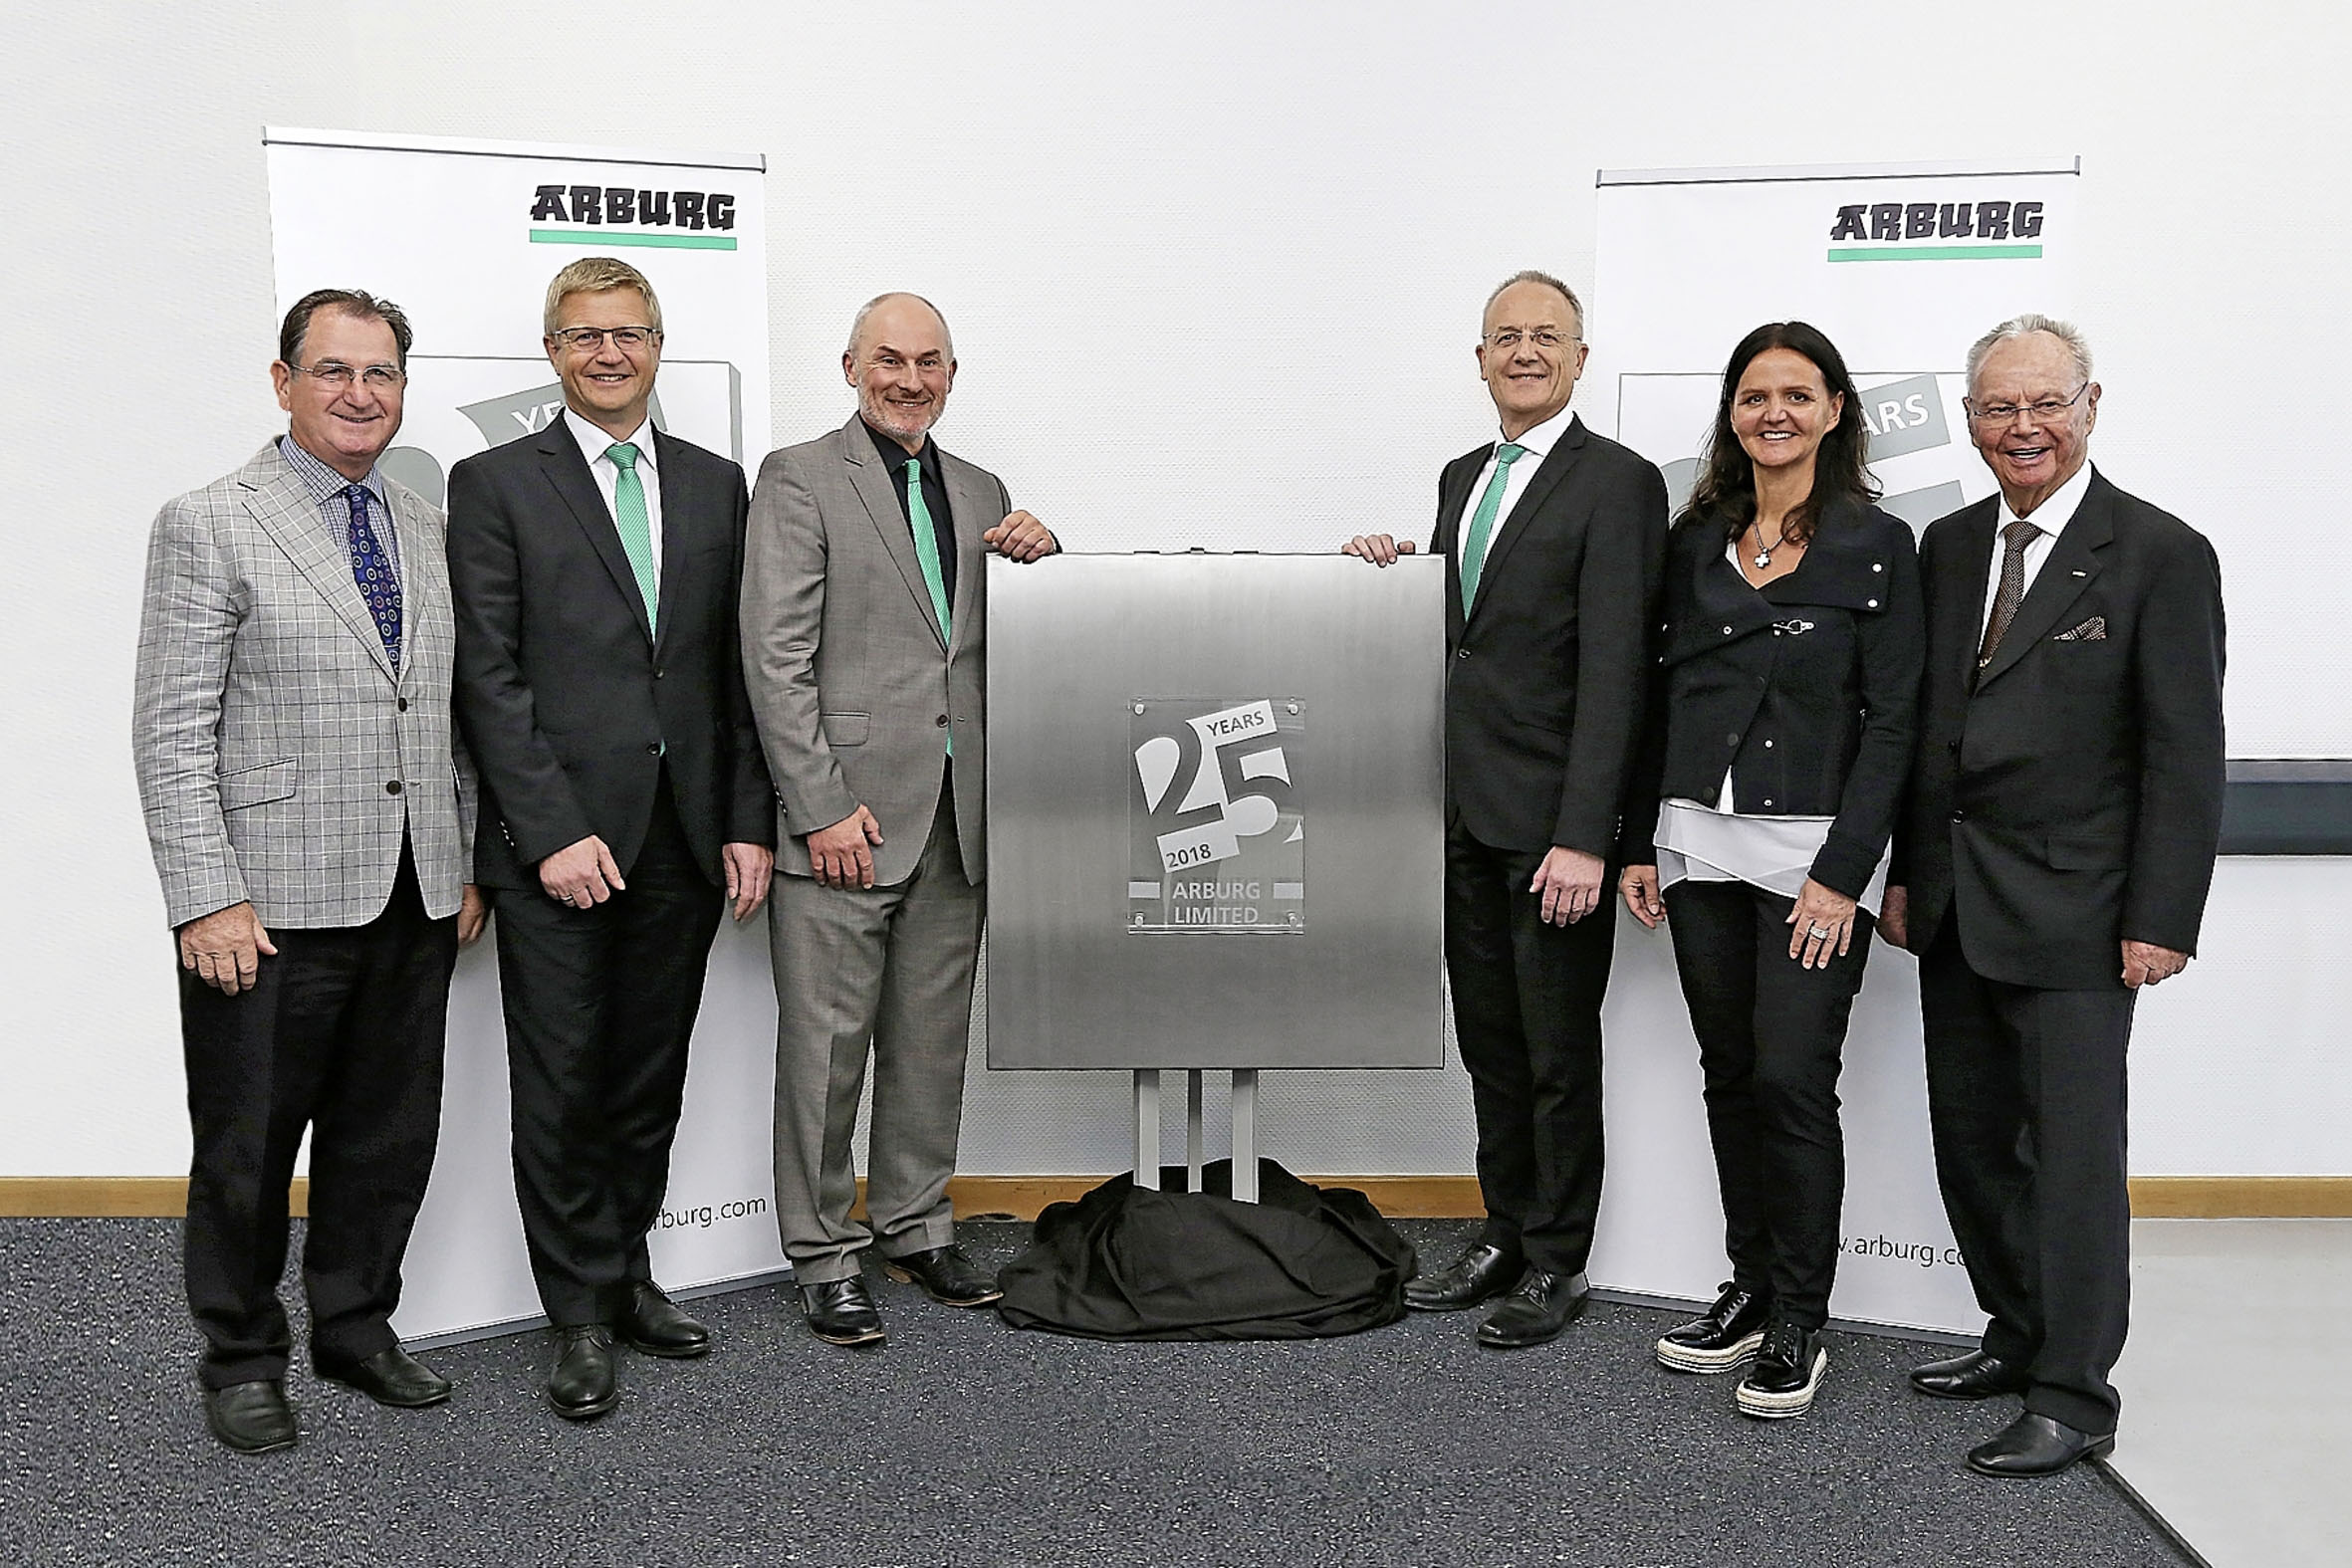 From right to left Eugen and Juliane Hehl, managing partners, Stephan Doehler, European director sales, Colin Tirel, MD, Gerhard Böhm, managing director sales, and Frank Davis, former subsidiary manager.